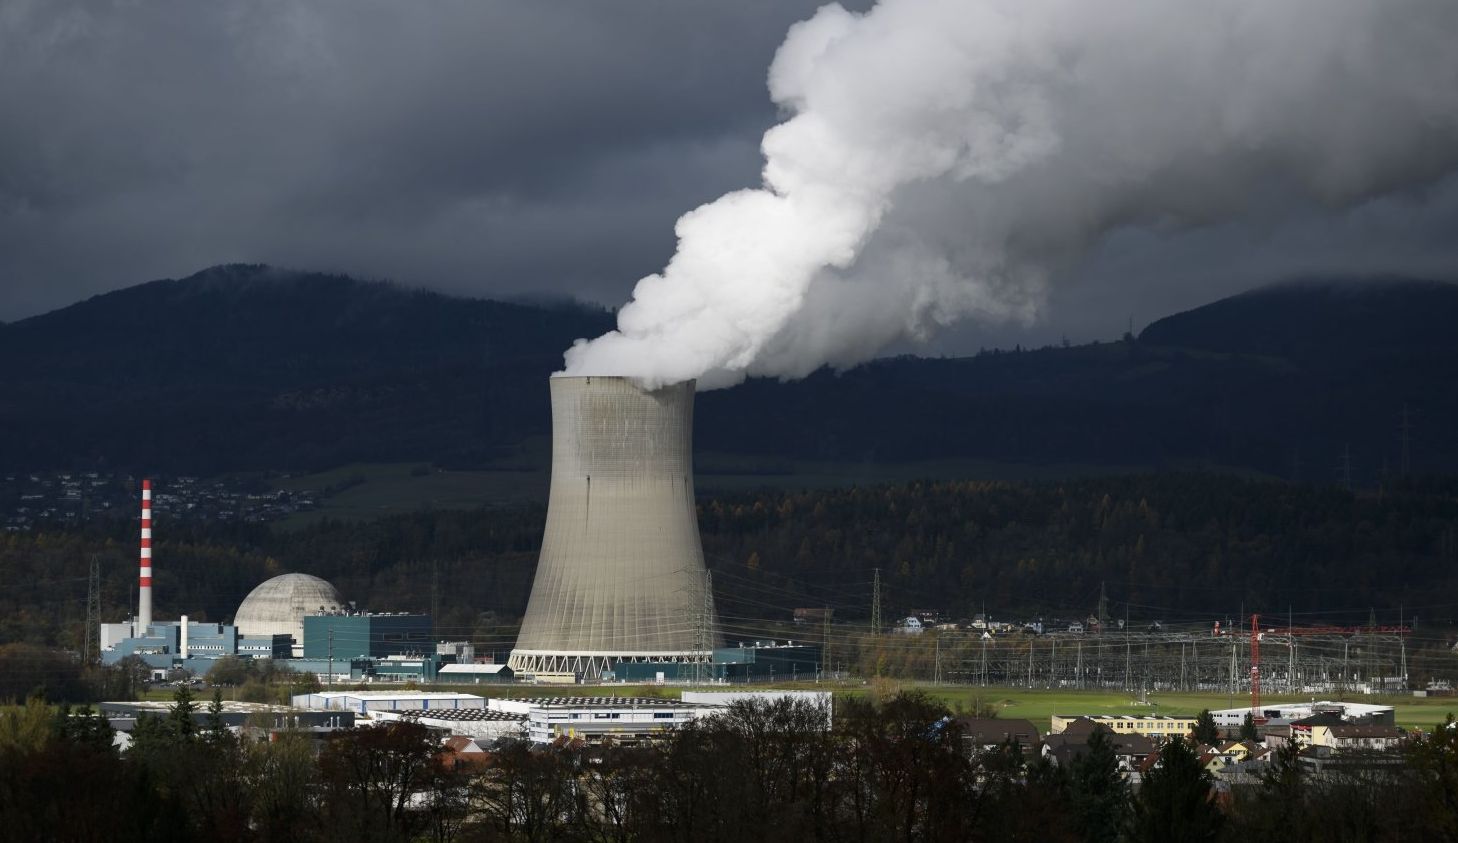 Switzerland have renounced nuclear energy